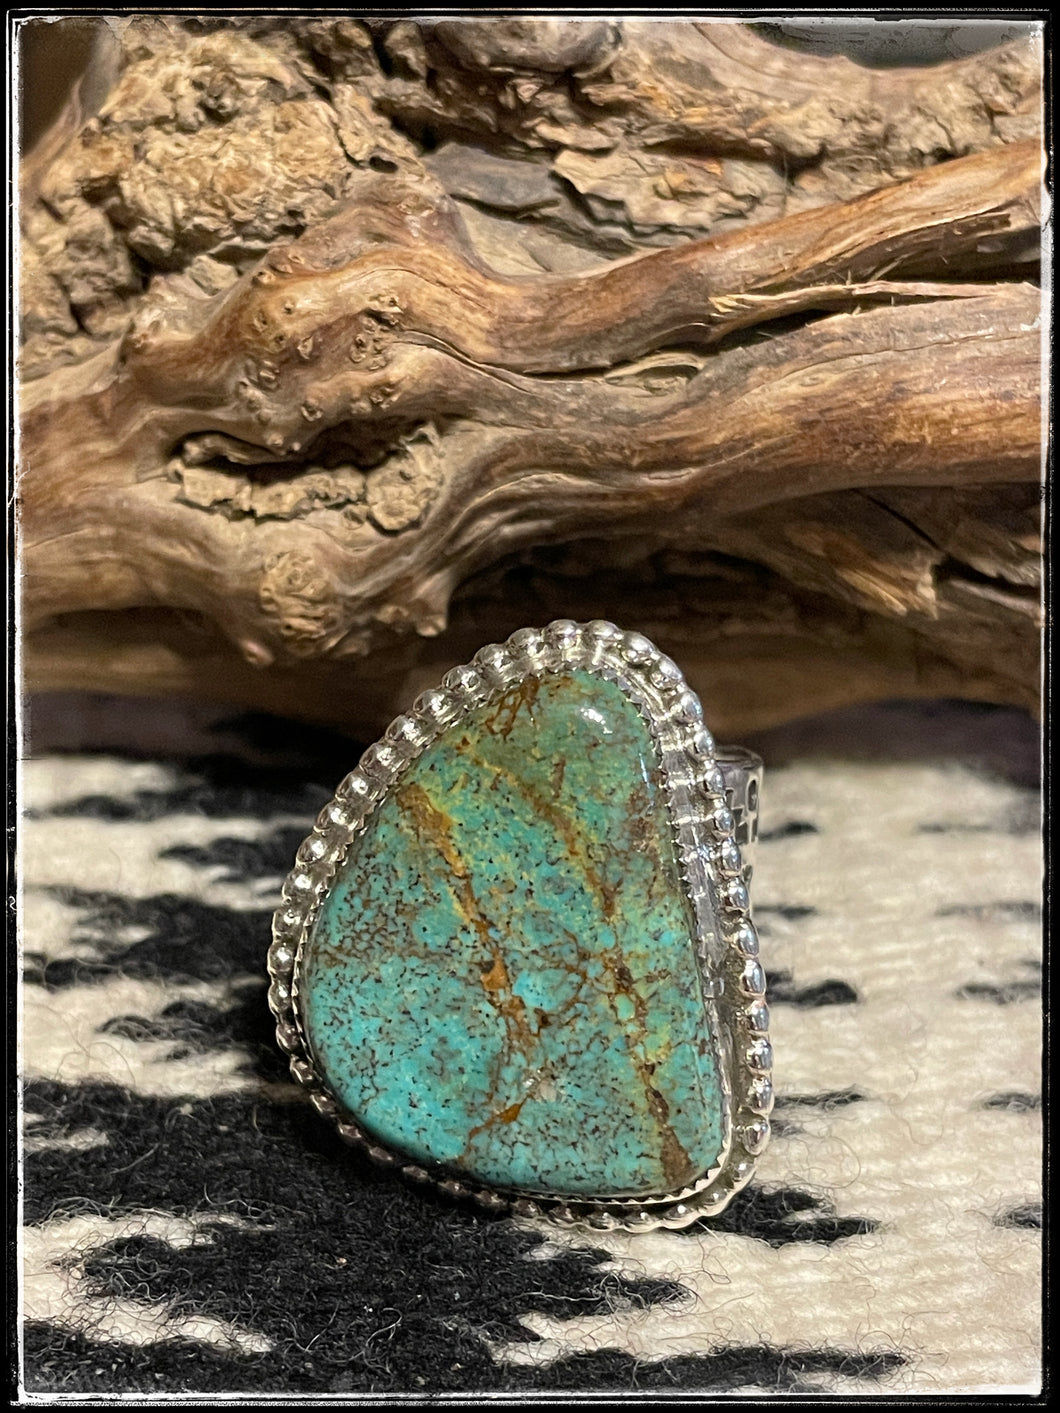 Del Arviso Navajo silversmith, large turquoise ring set in sterling silver with an extra wide, hand stamped band.